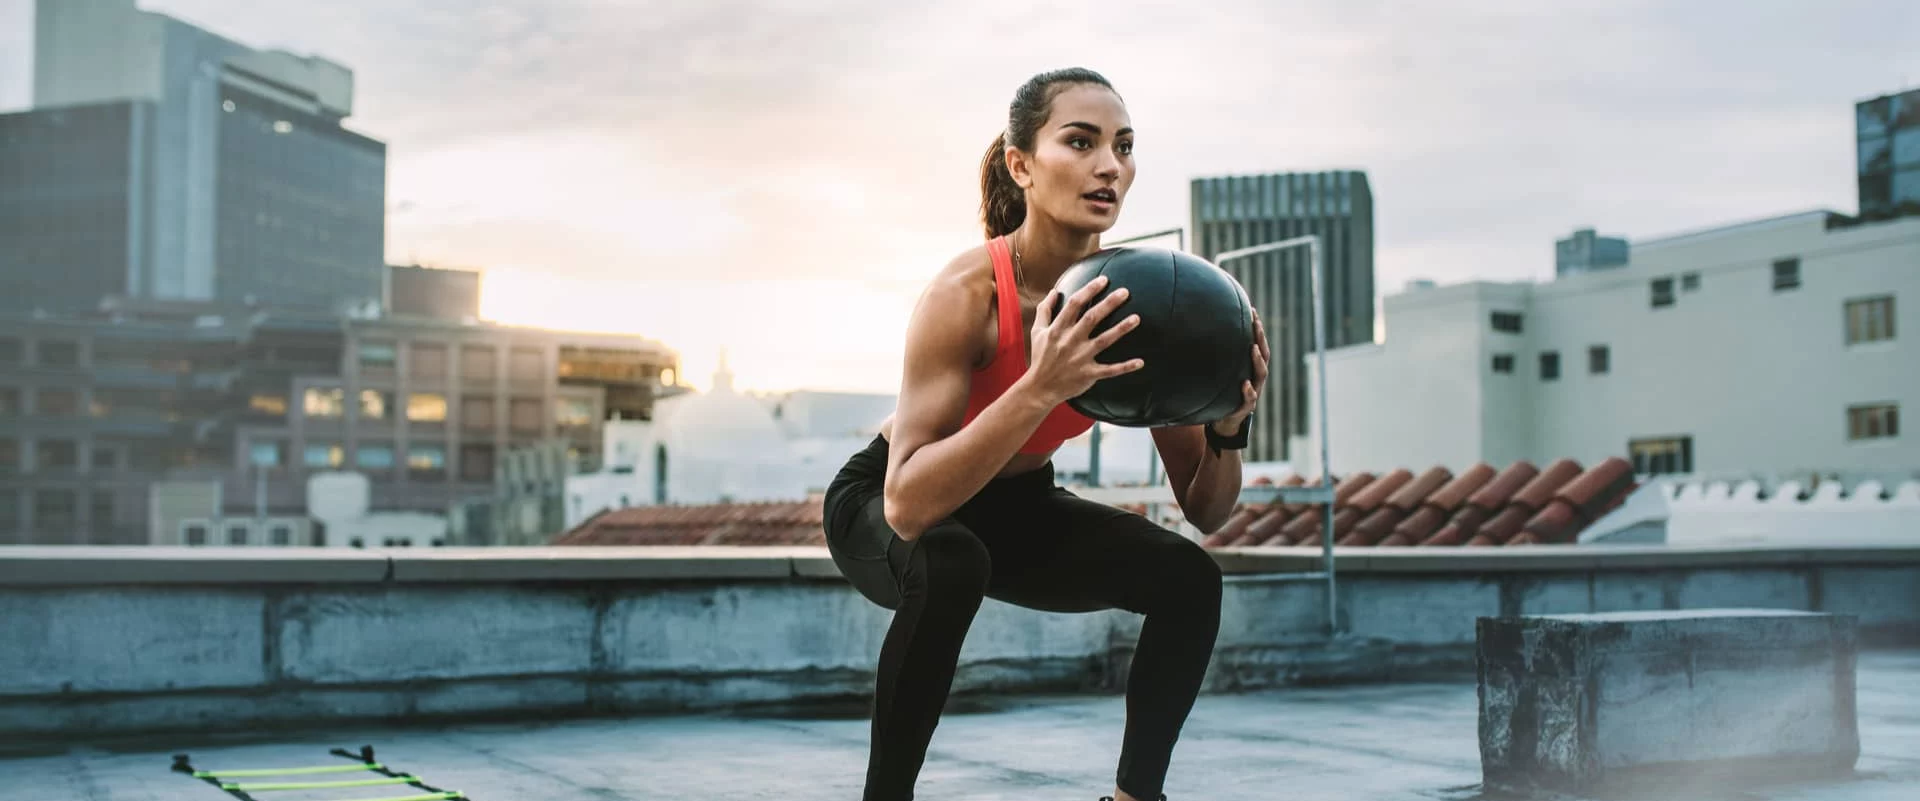 Fit woman exercises with medicine ball e1654791154664